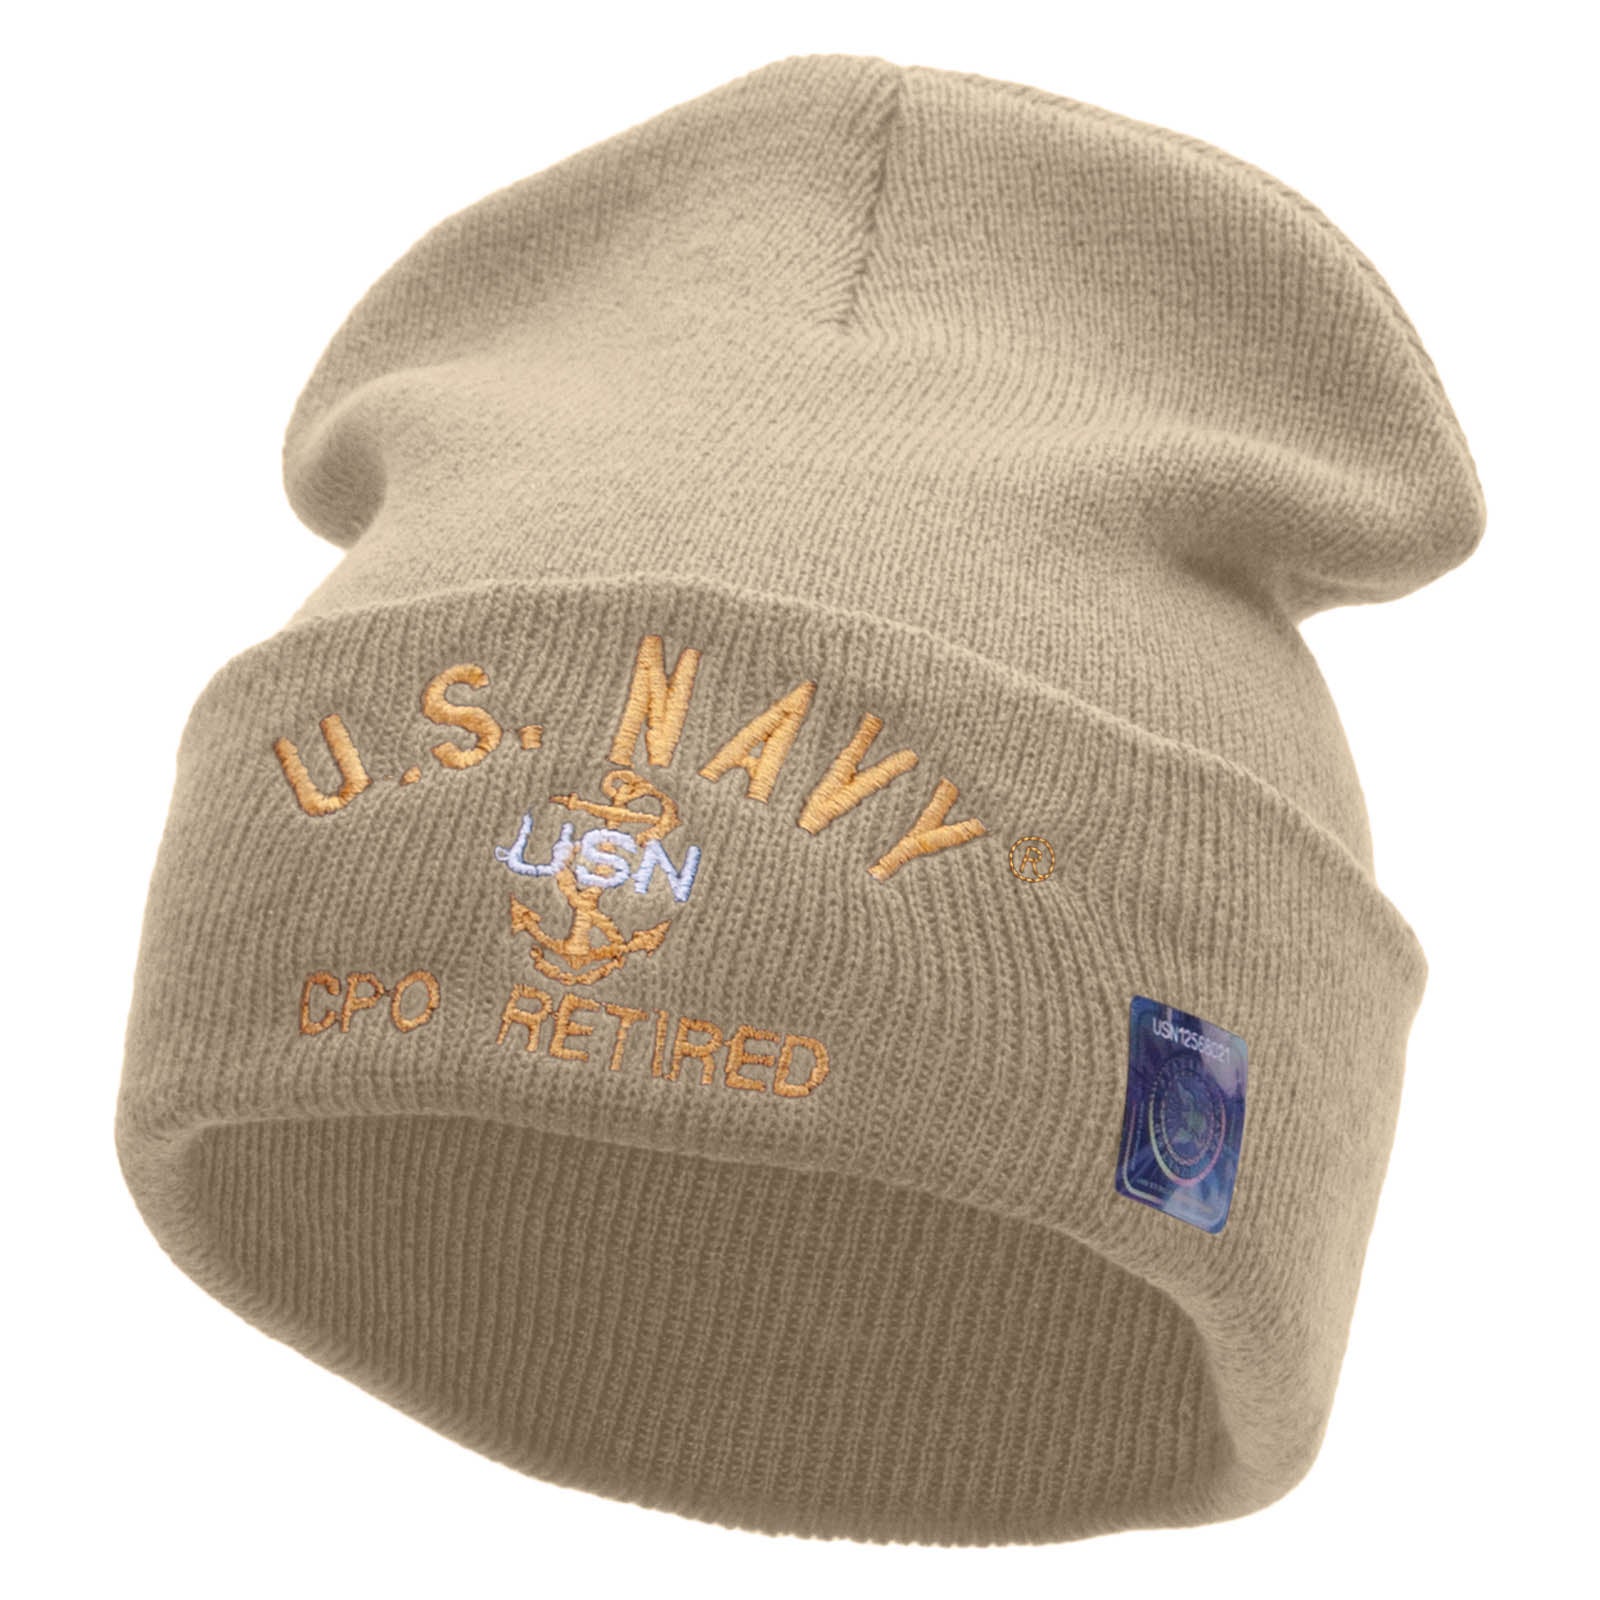 Licensed US Navy CPO Retired Military Embroidered Long Beanie Made in USA - Khaki OSFM